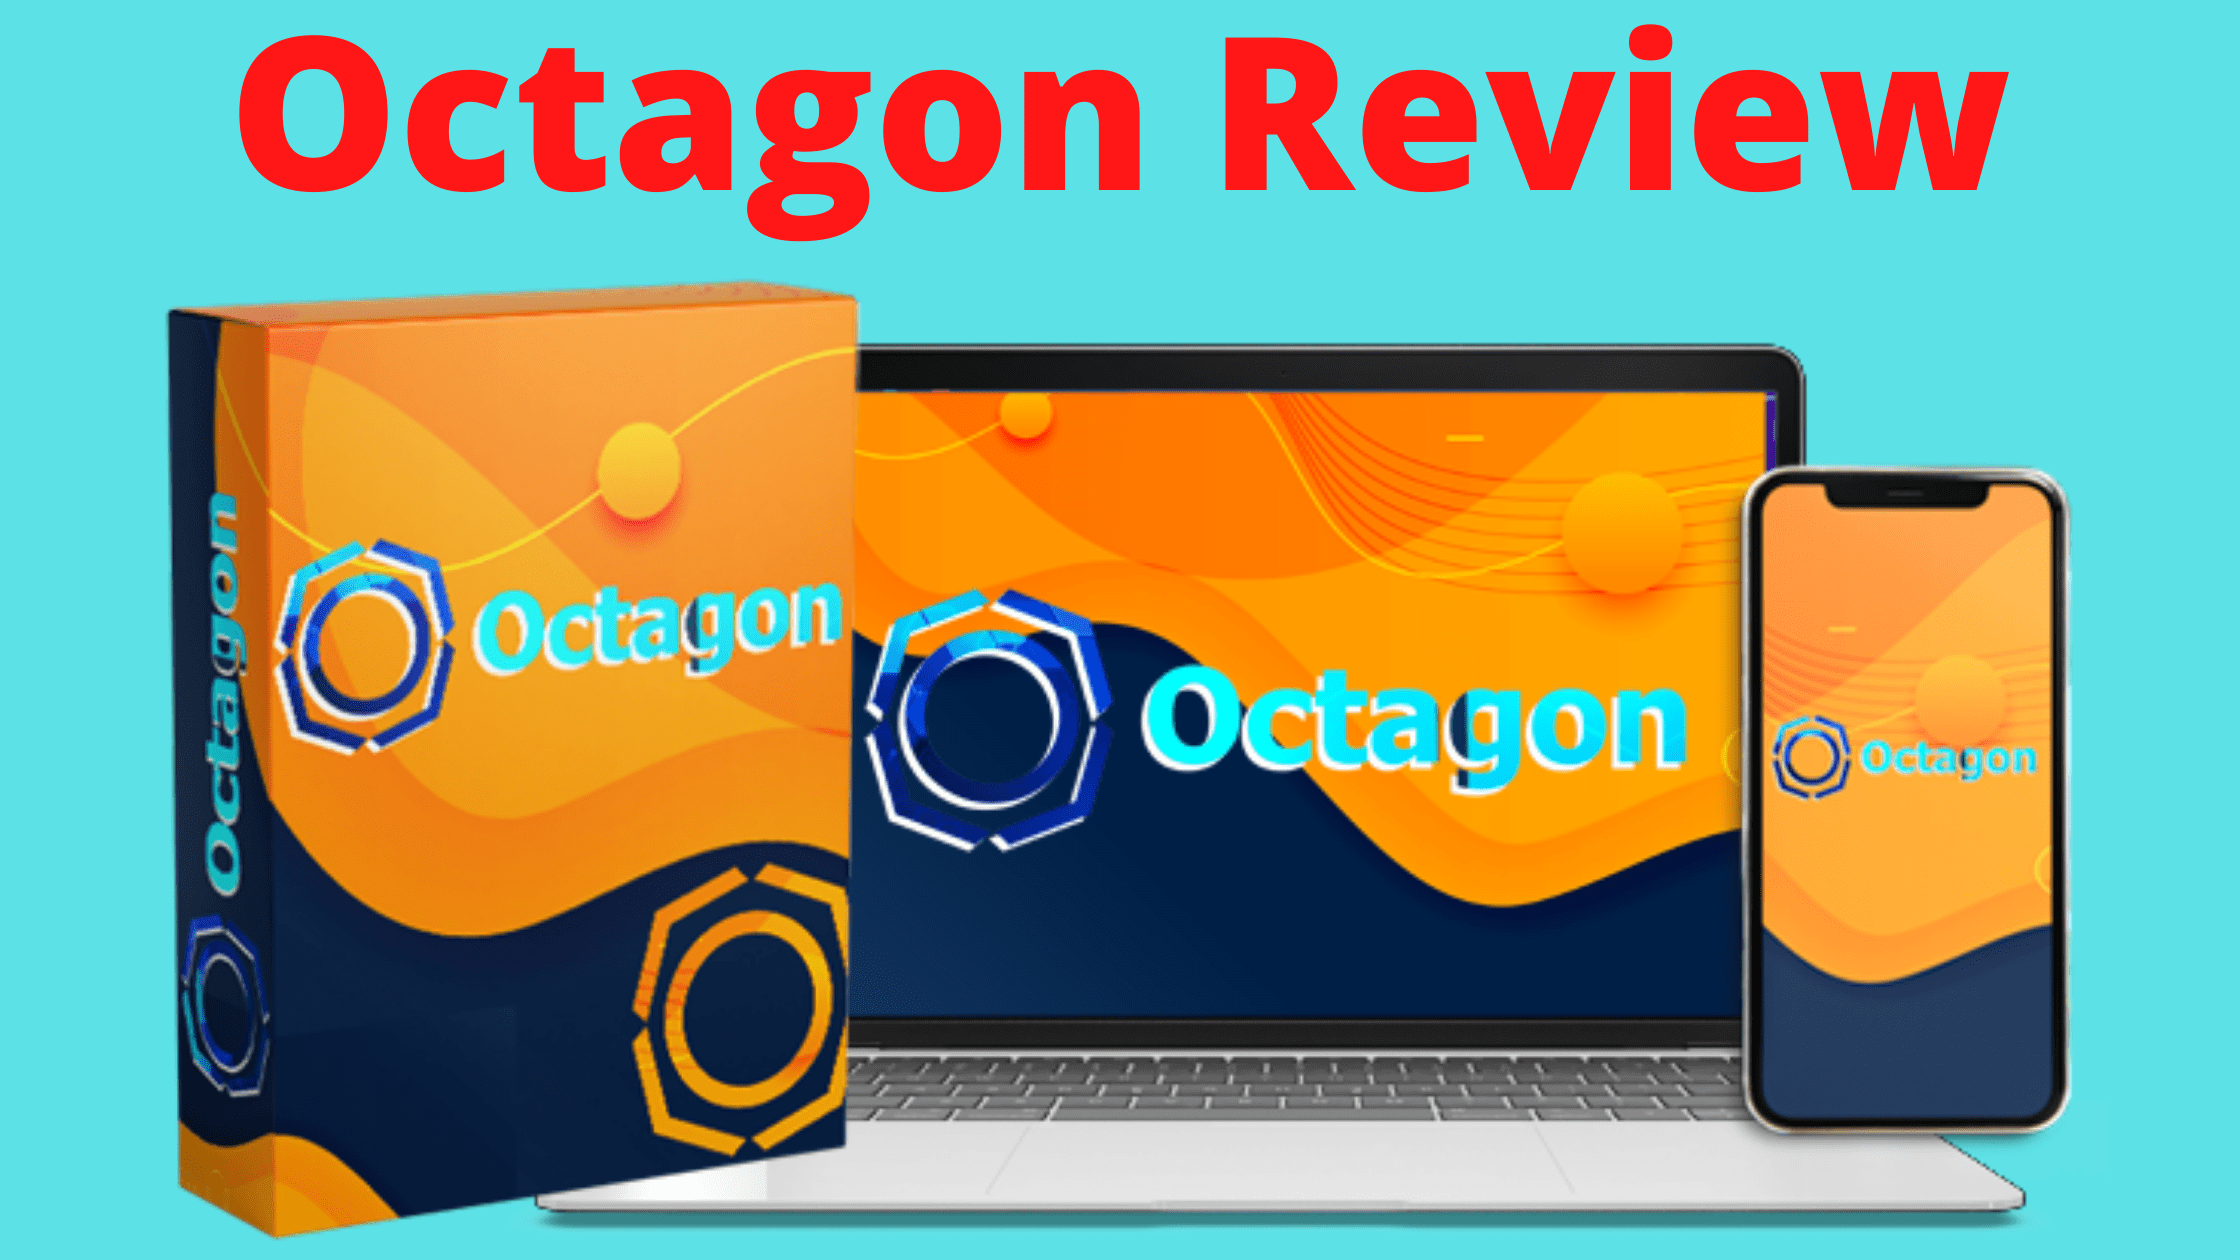 Octagon Review